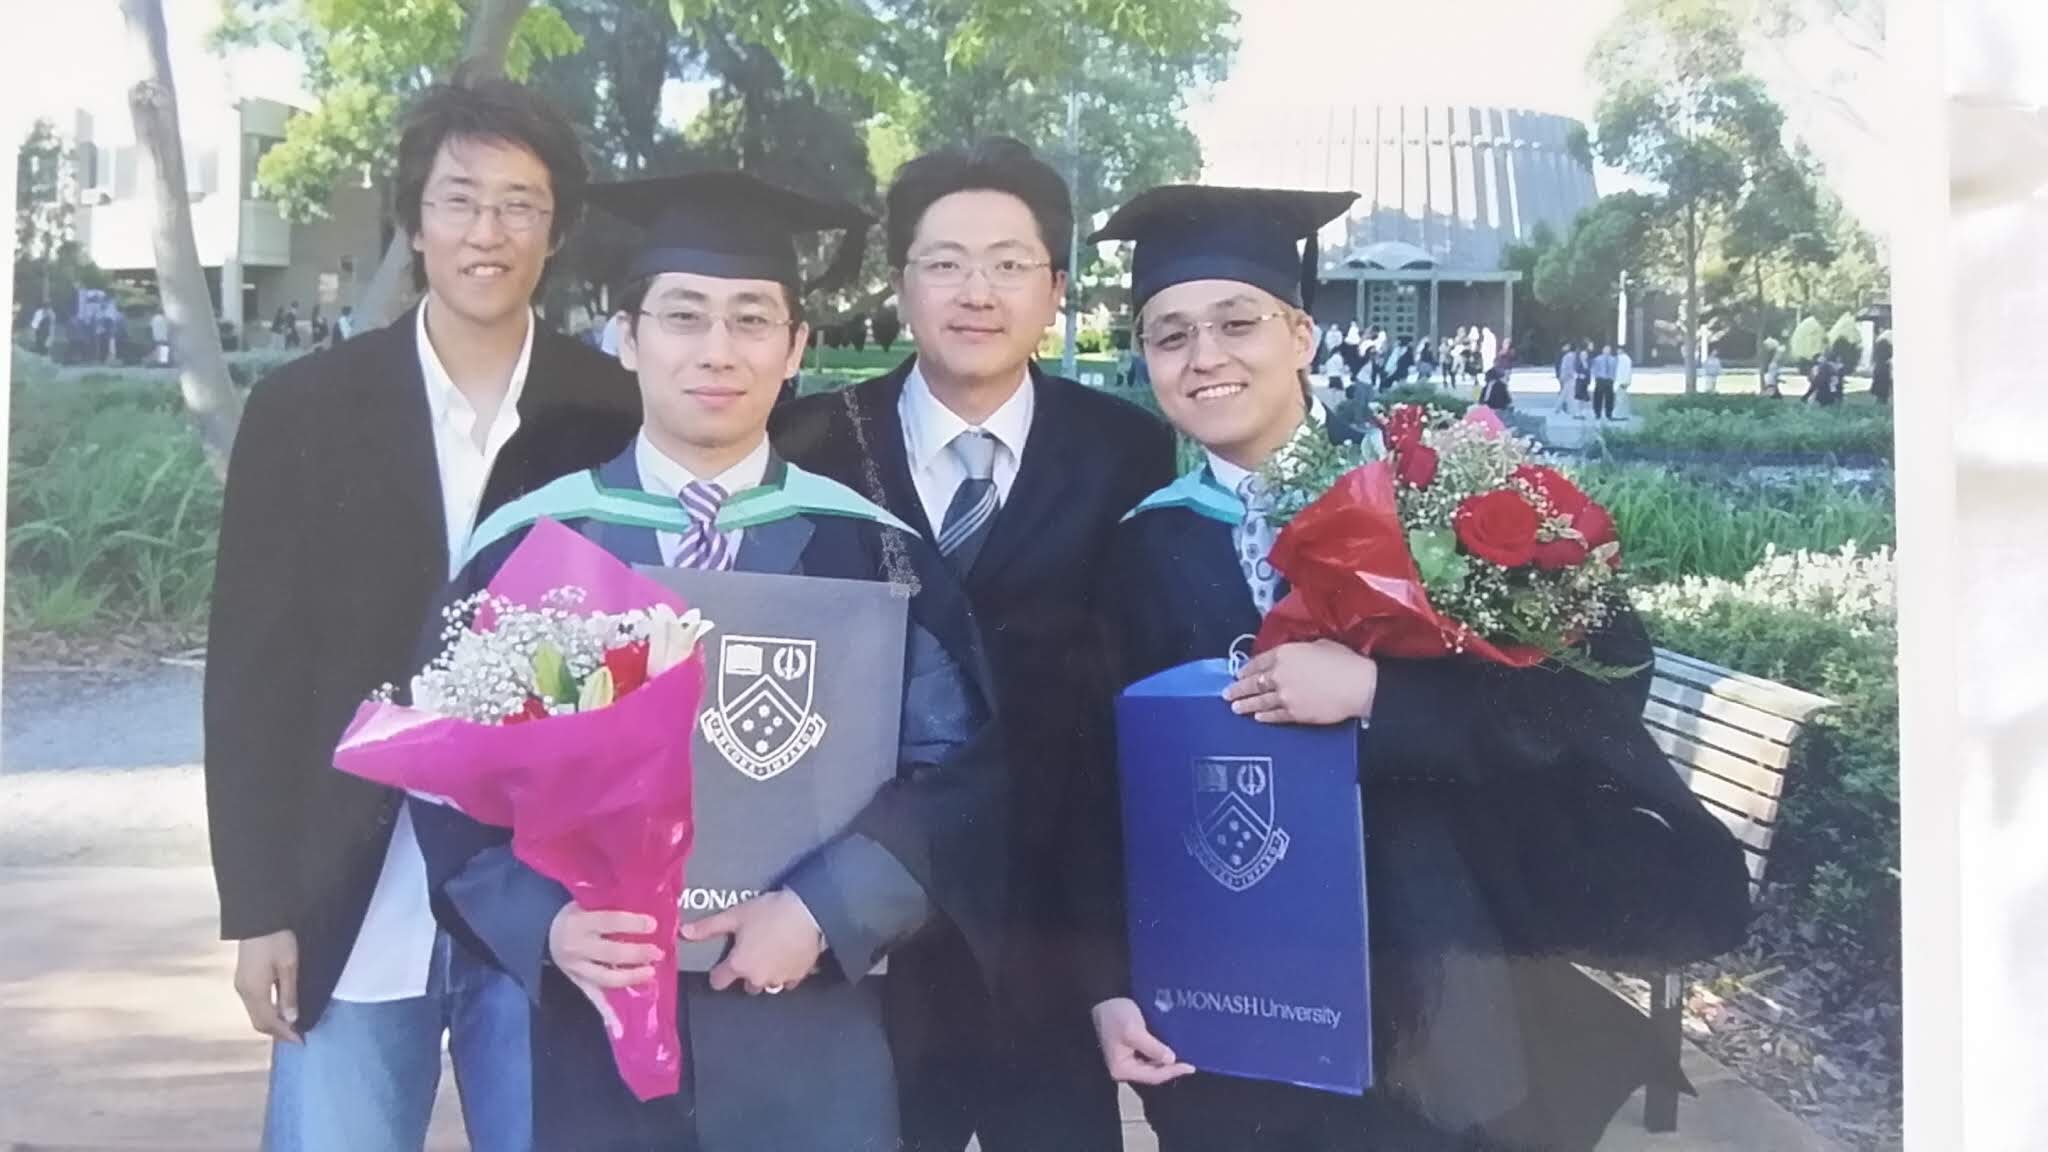 From left: JJ Park (fellow Monash student) with Max Ji, Jun Lee and Rio Yoon